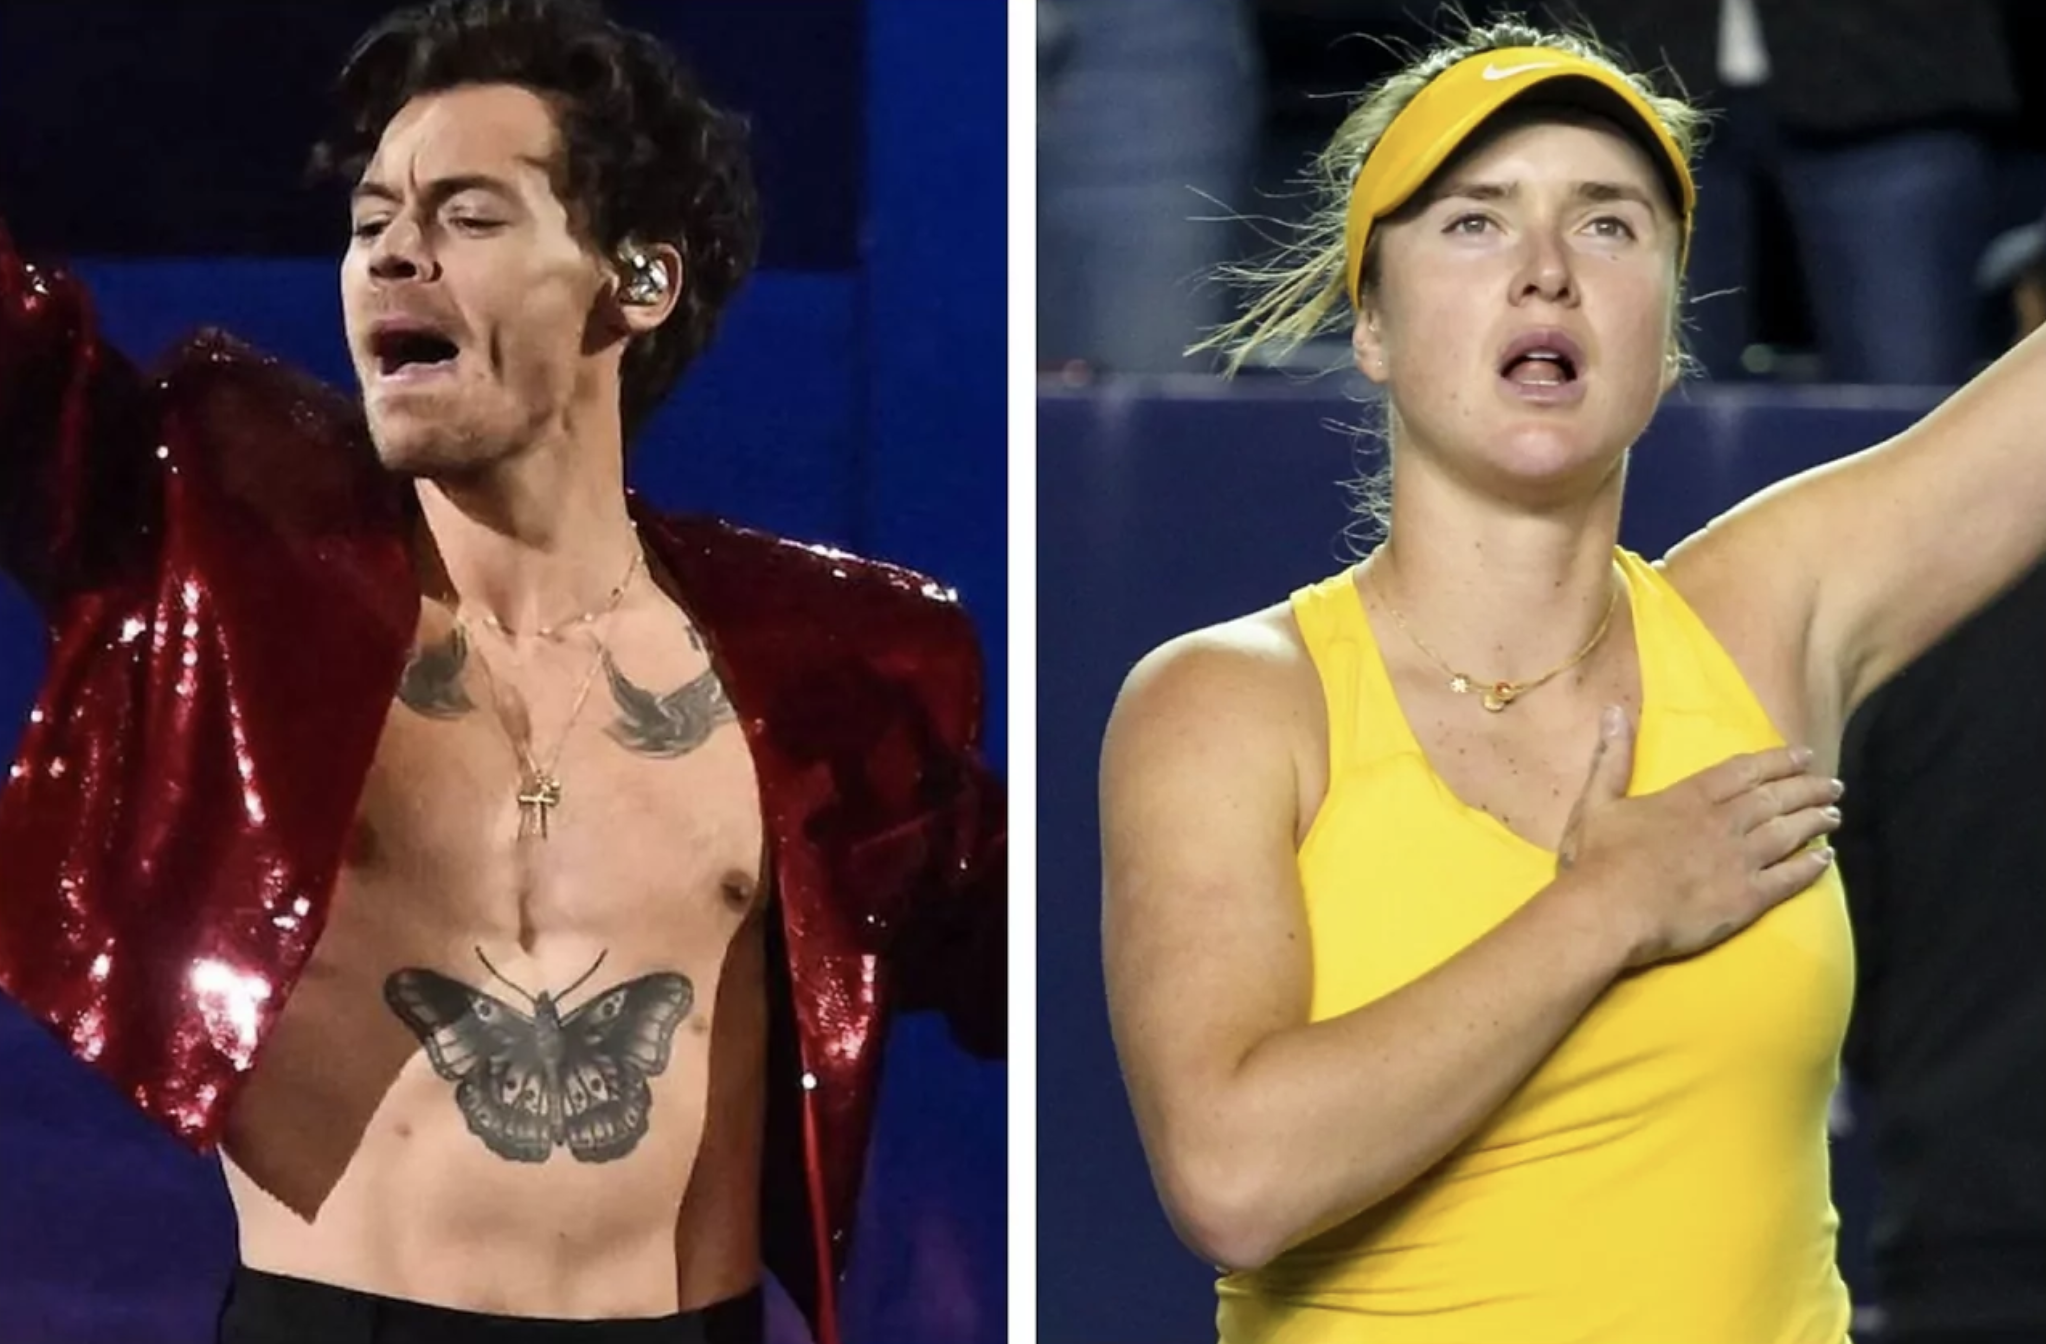 Harry Styles and his surprise gift for Elina Svitolina after she moves on at Wimbledon